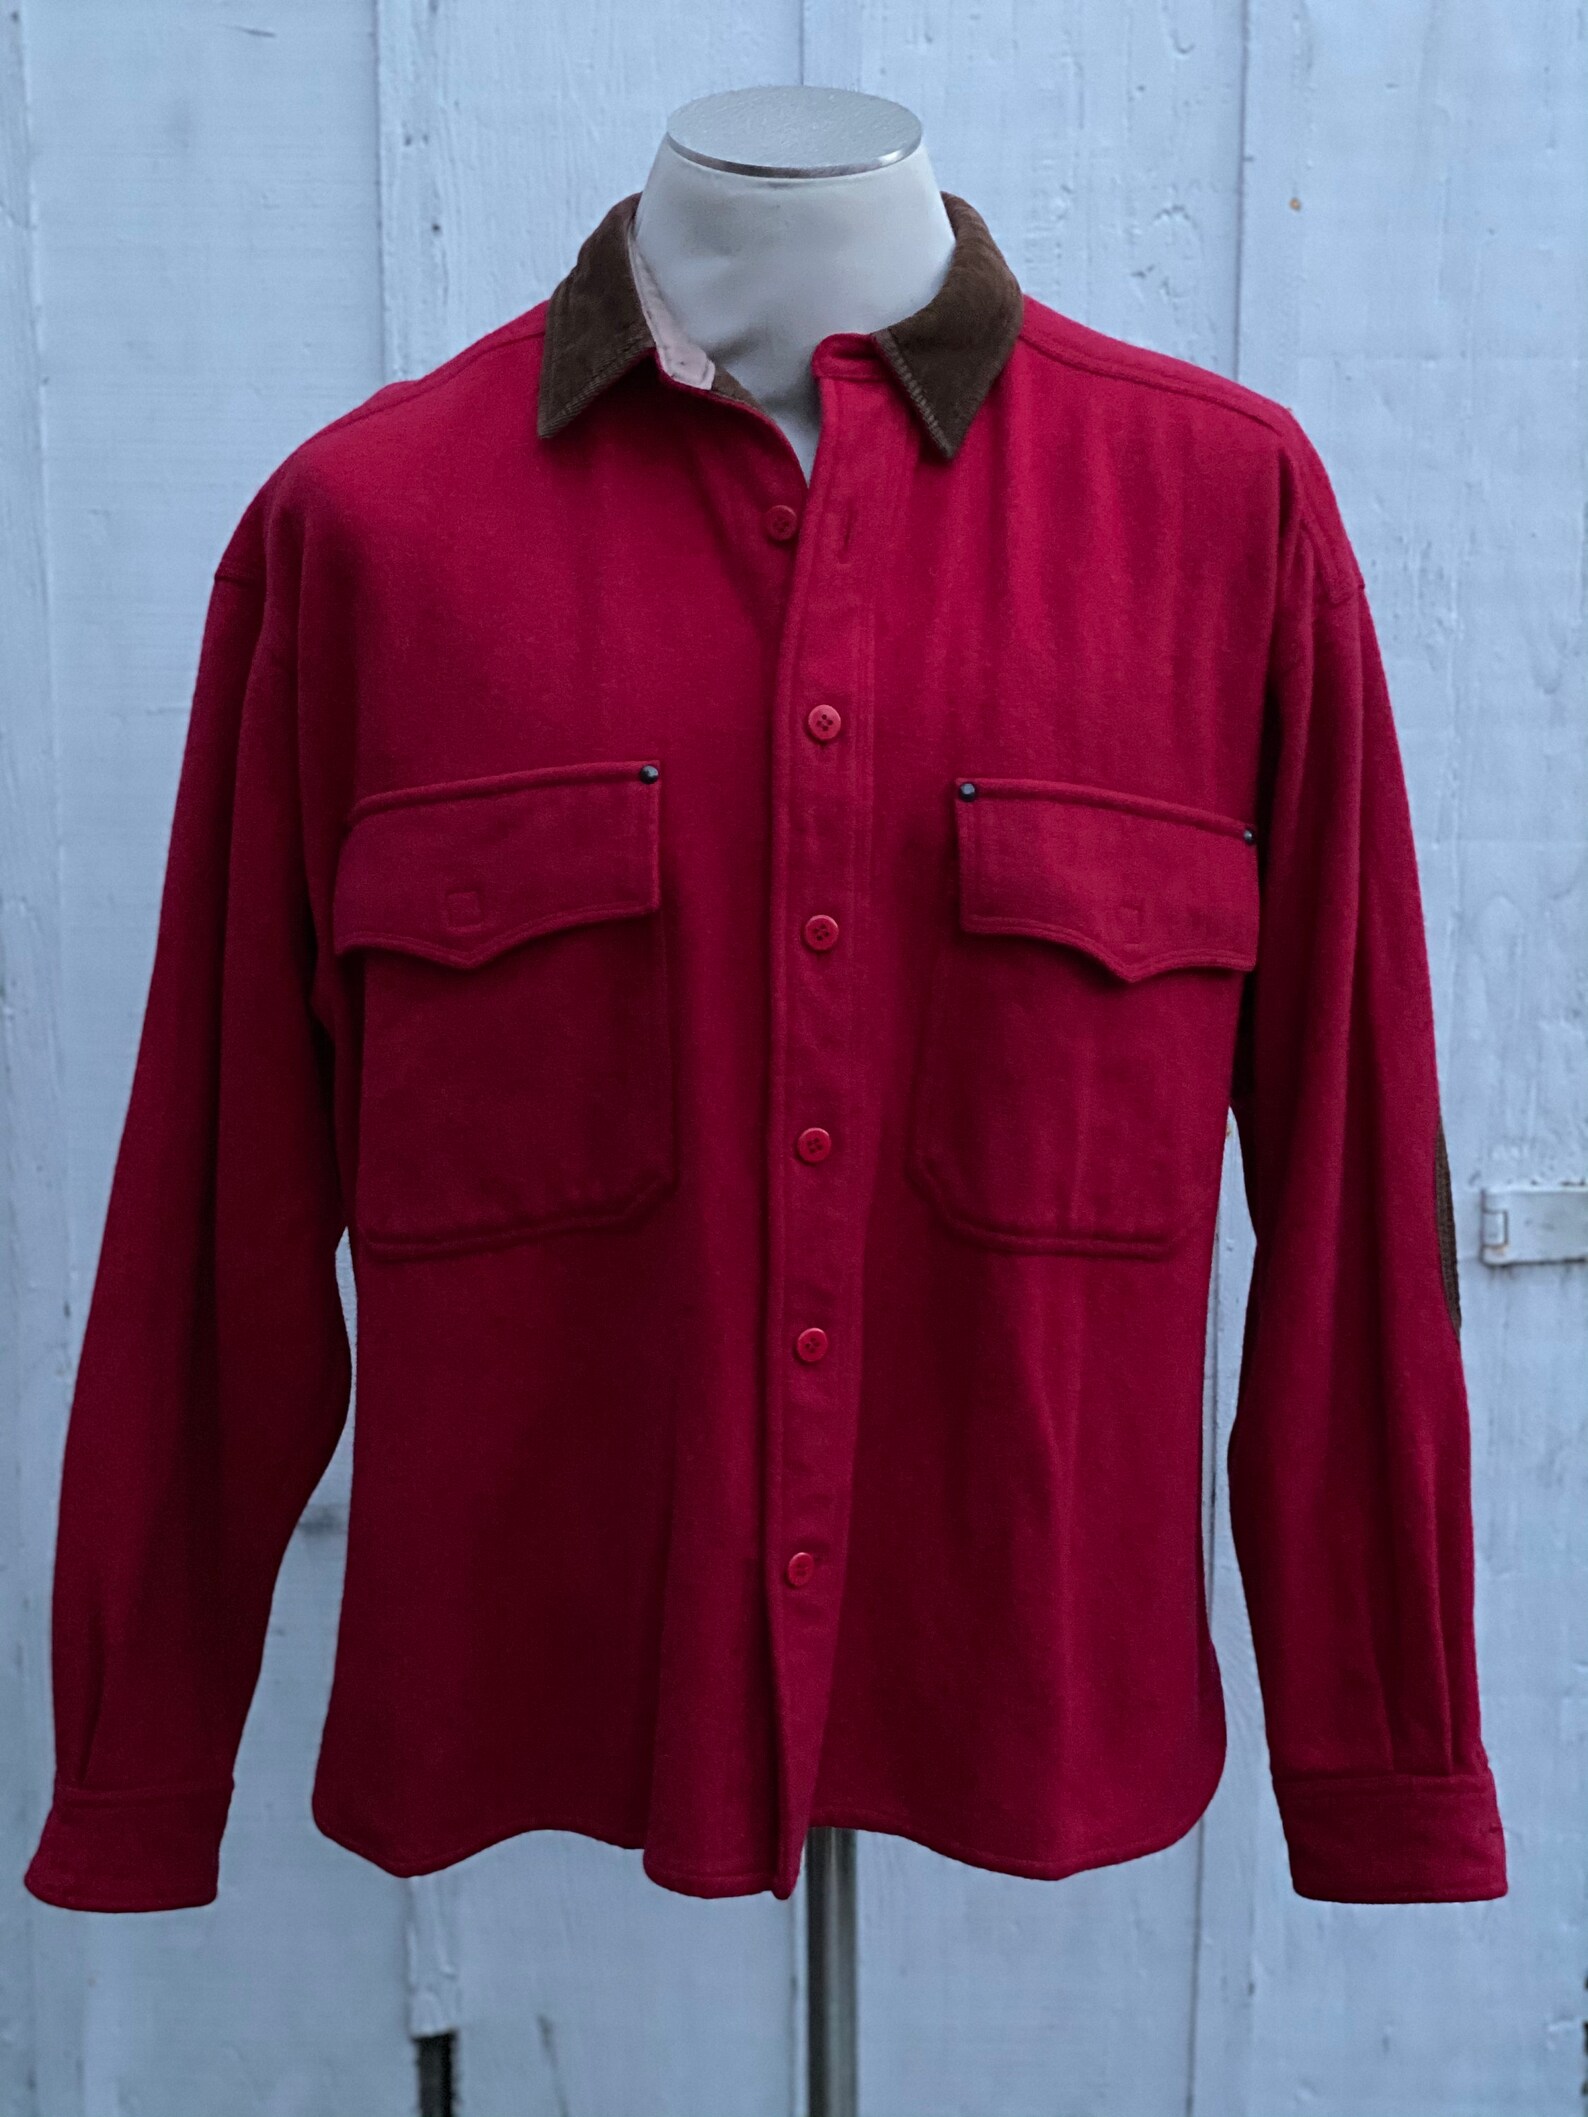 Vintage 1970s GANS Red Wool Shirt / Jacket With Corduroy Elbow | Etsy